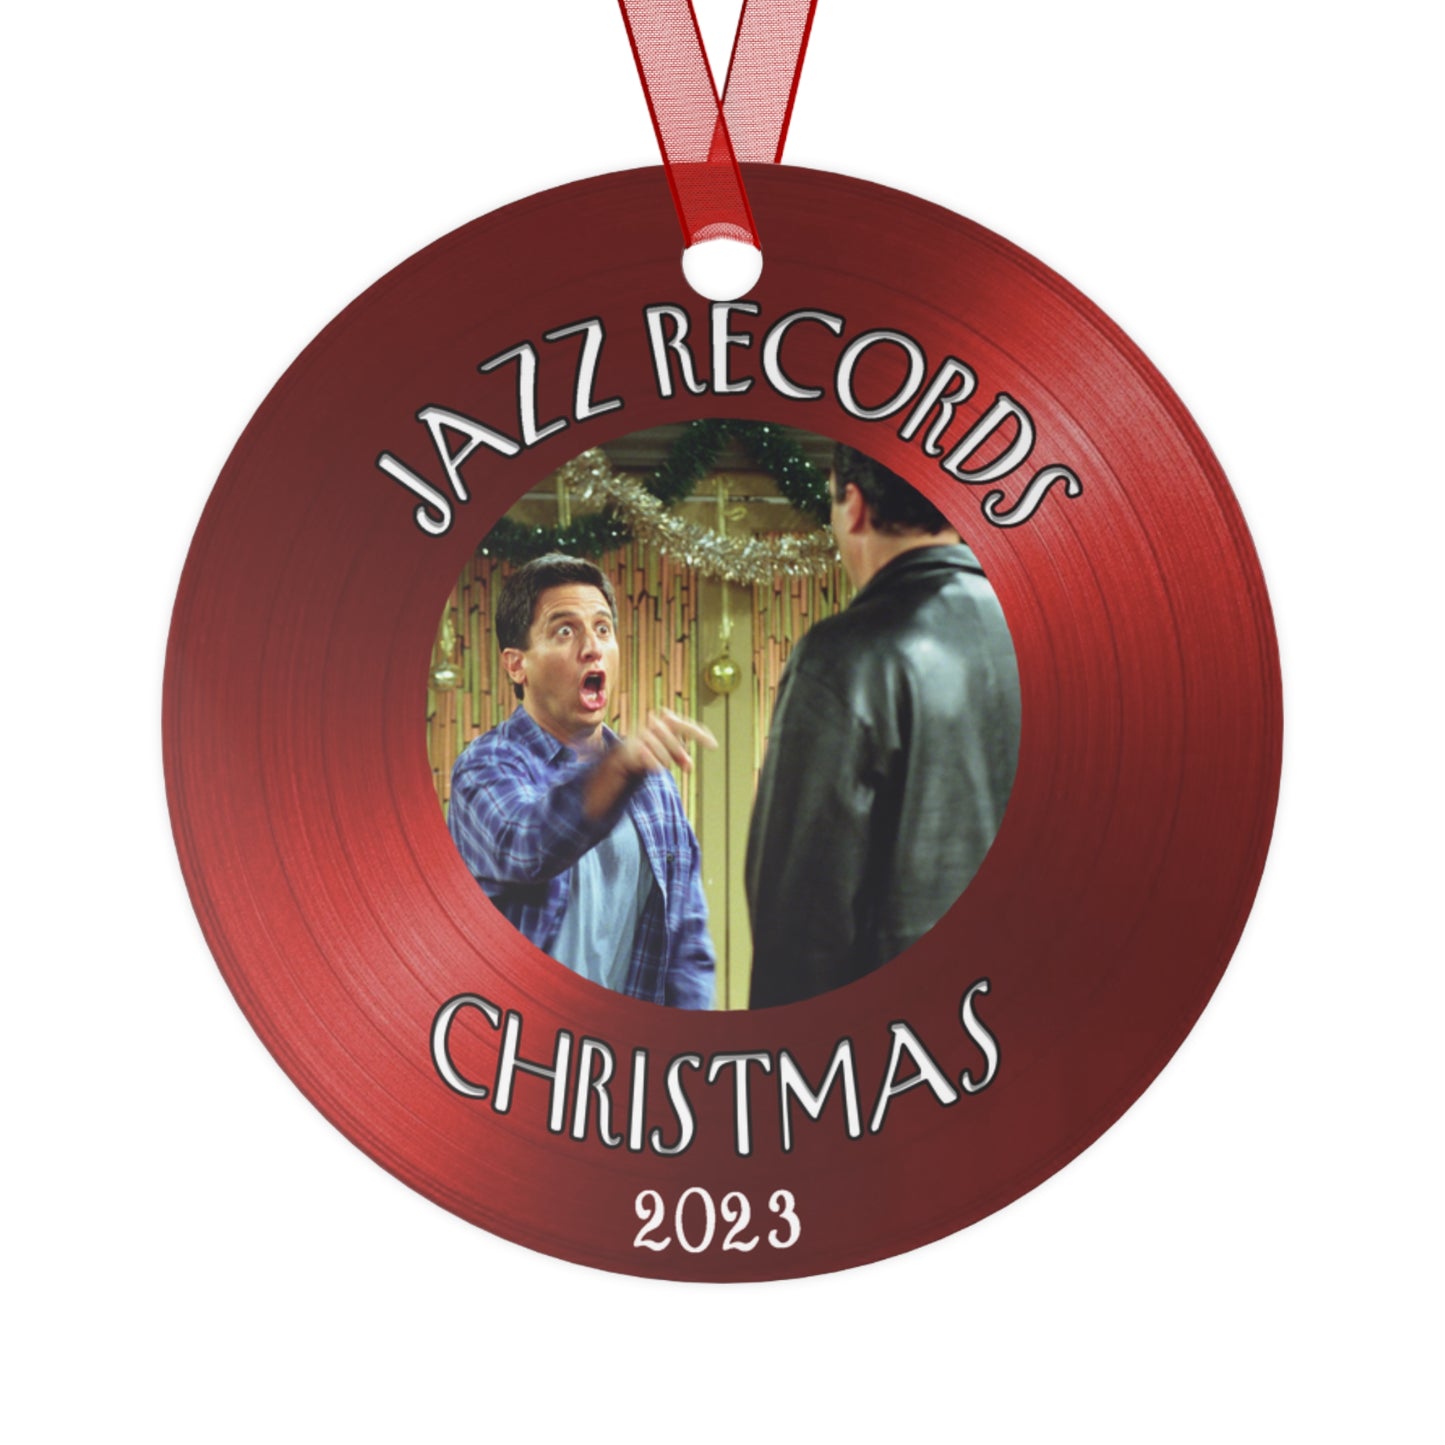 Jazz Records Christmas Ornament featuring Ray (Limited Edition)